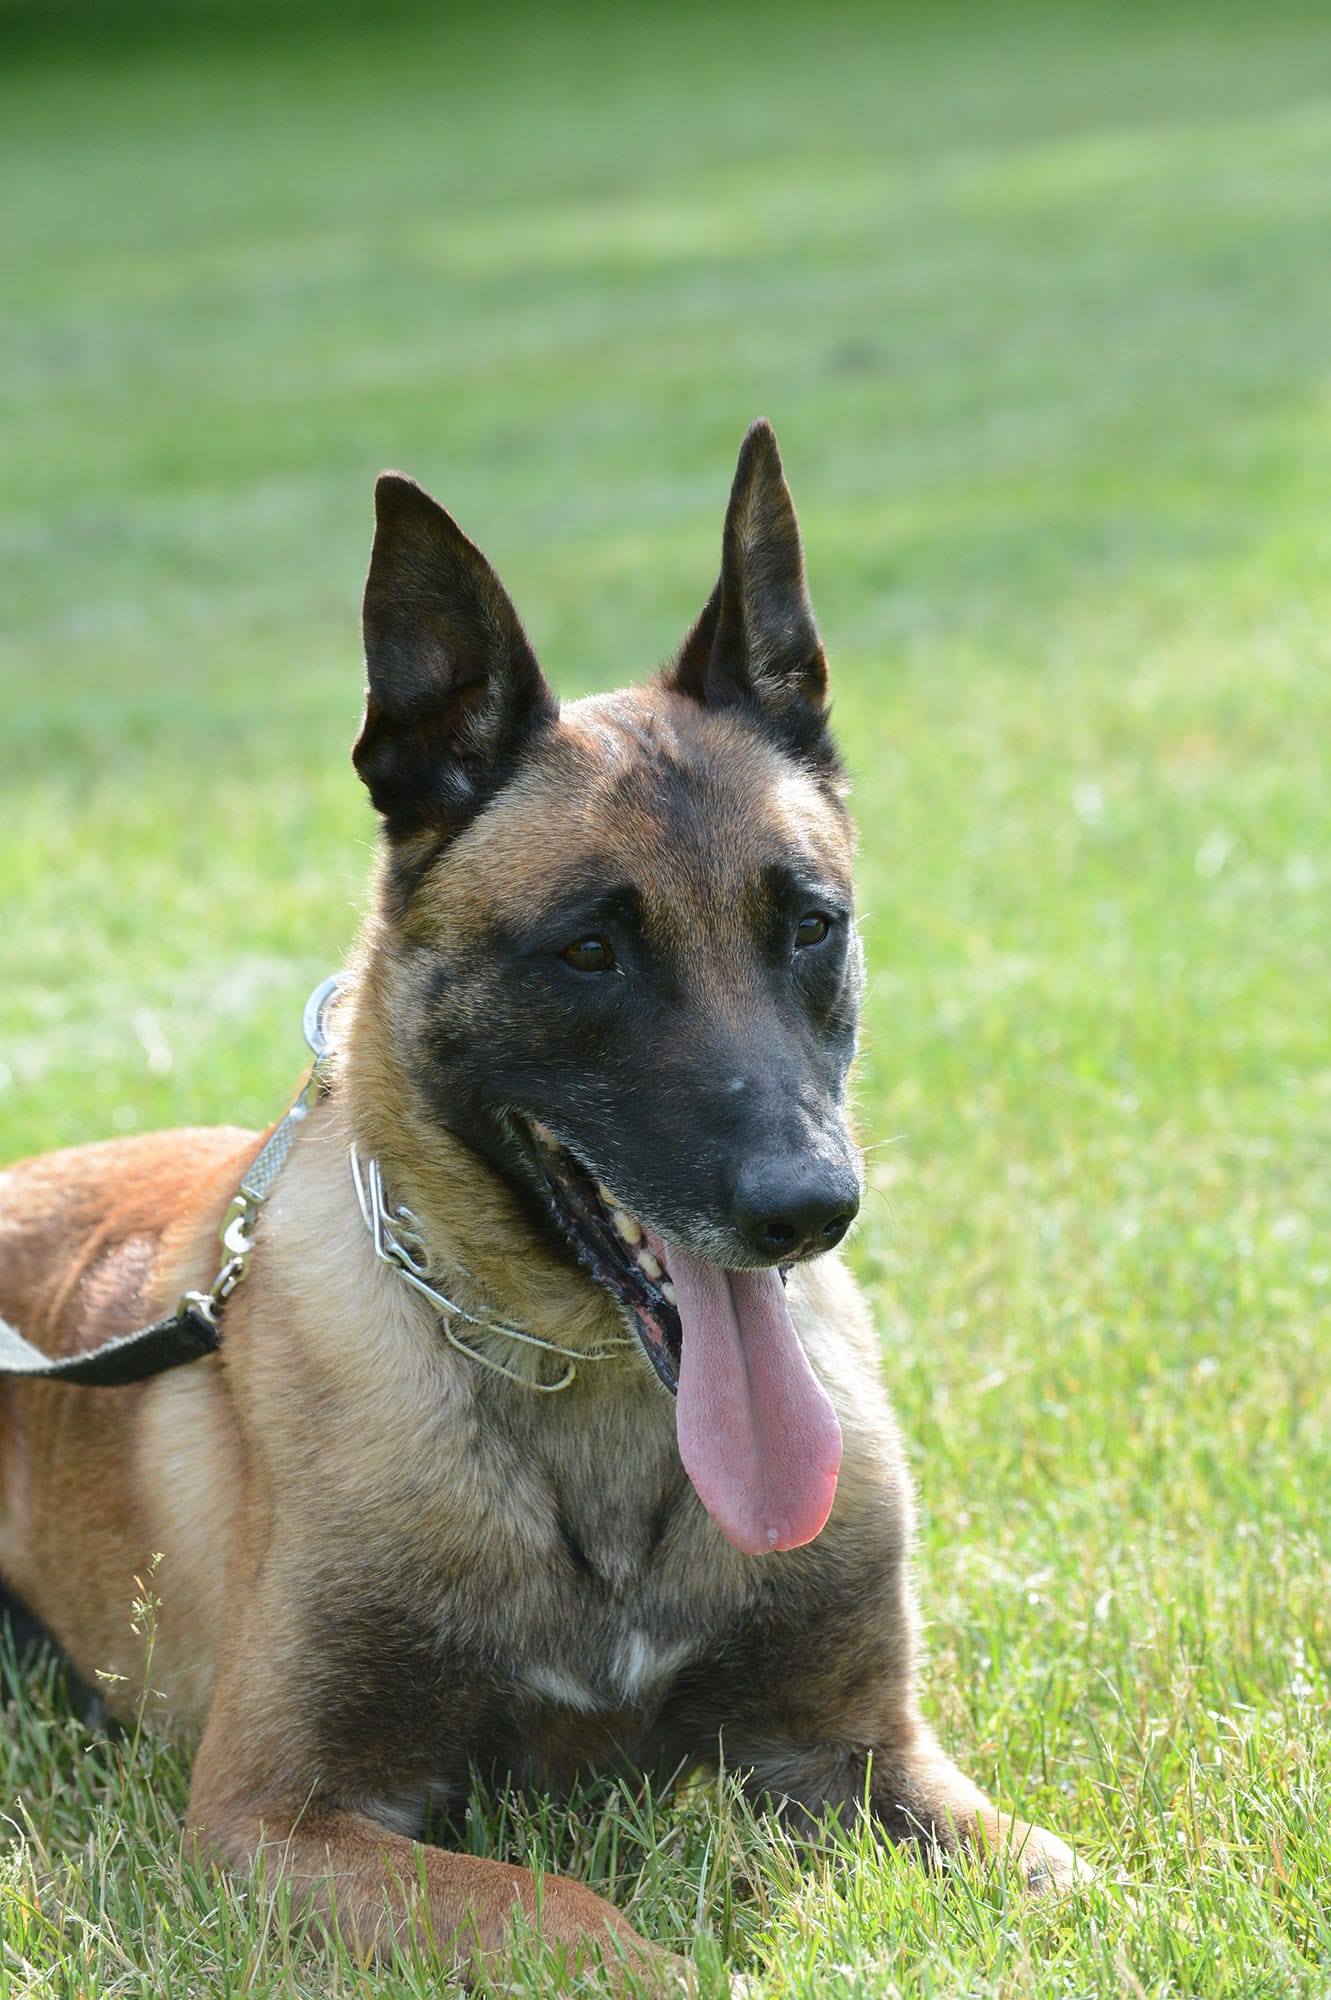 Ike, a Vancouver Police dog, died following stab wounds he received while pursuing a suspect Sept. 1.